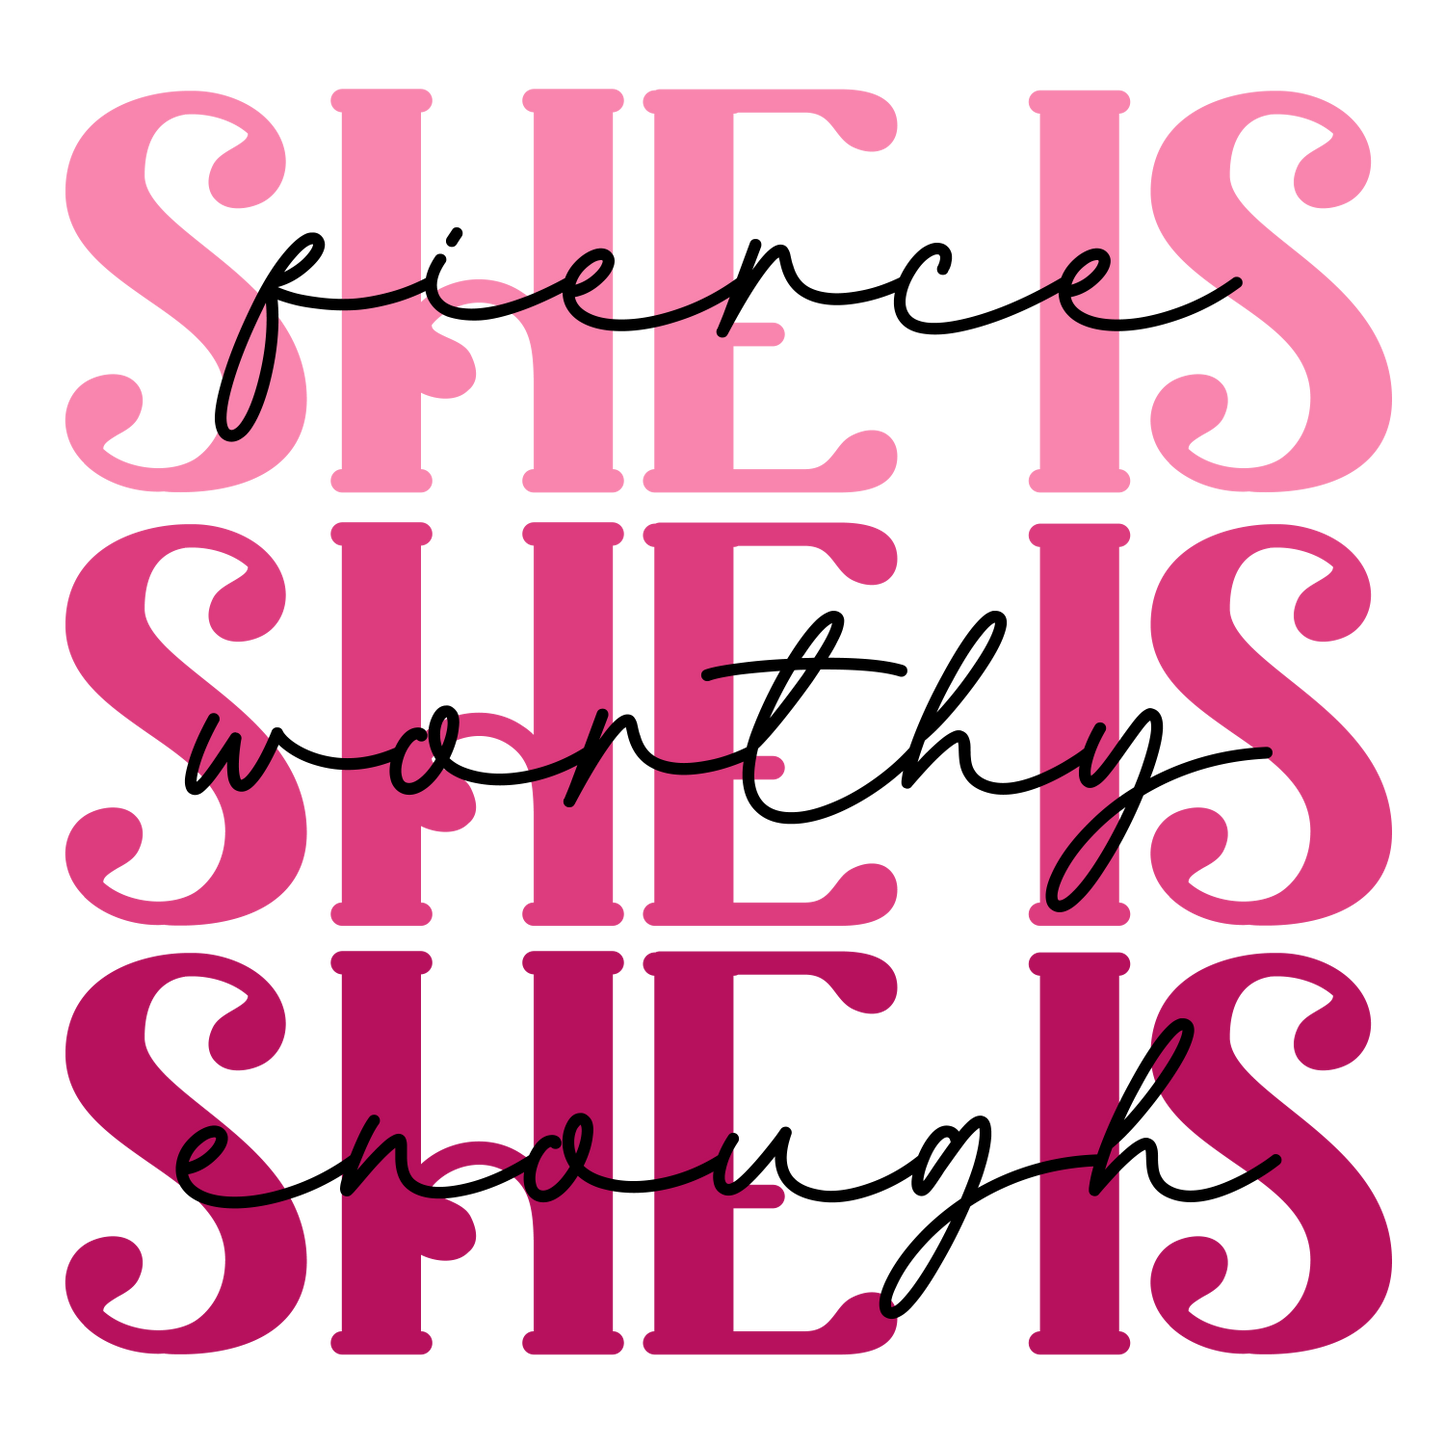 BREAST CANCER PRINT 12 - SHE IS